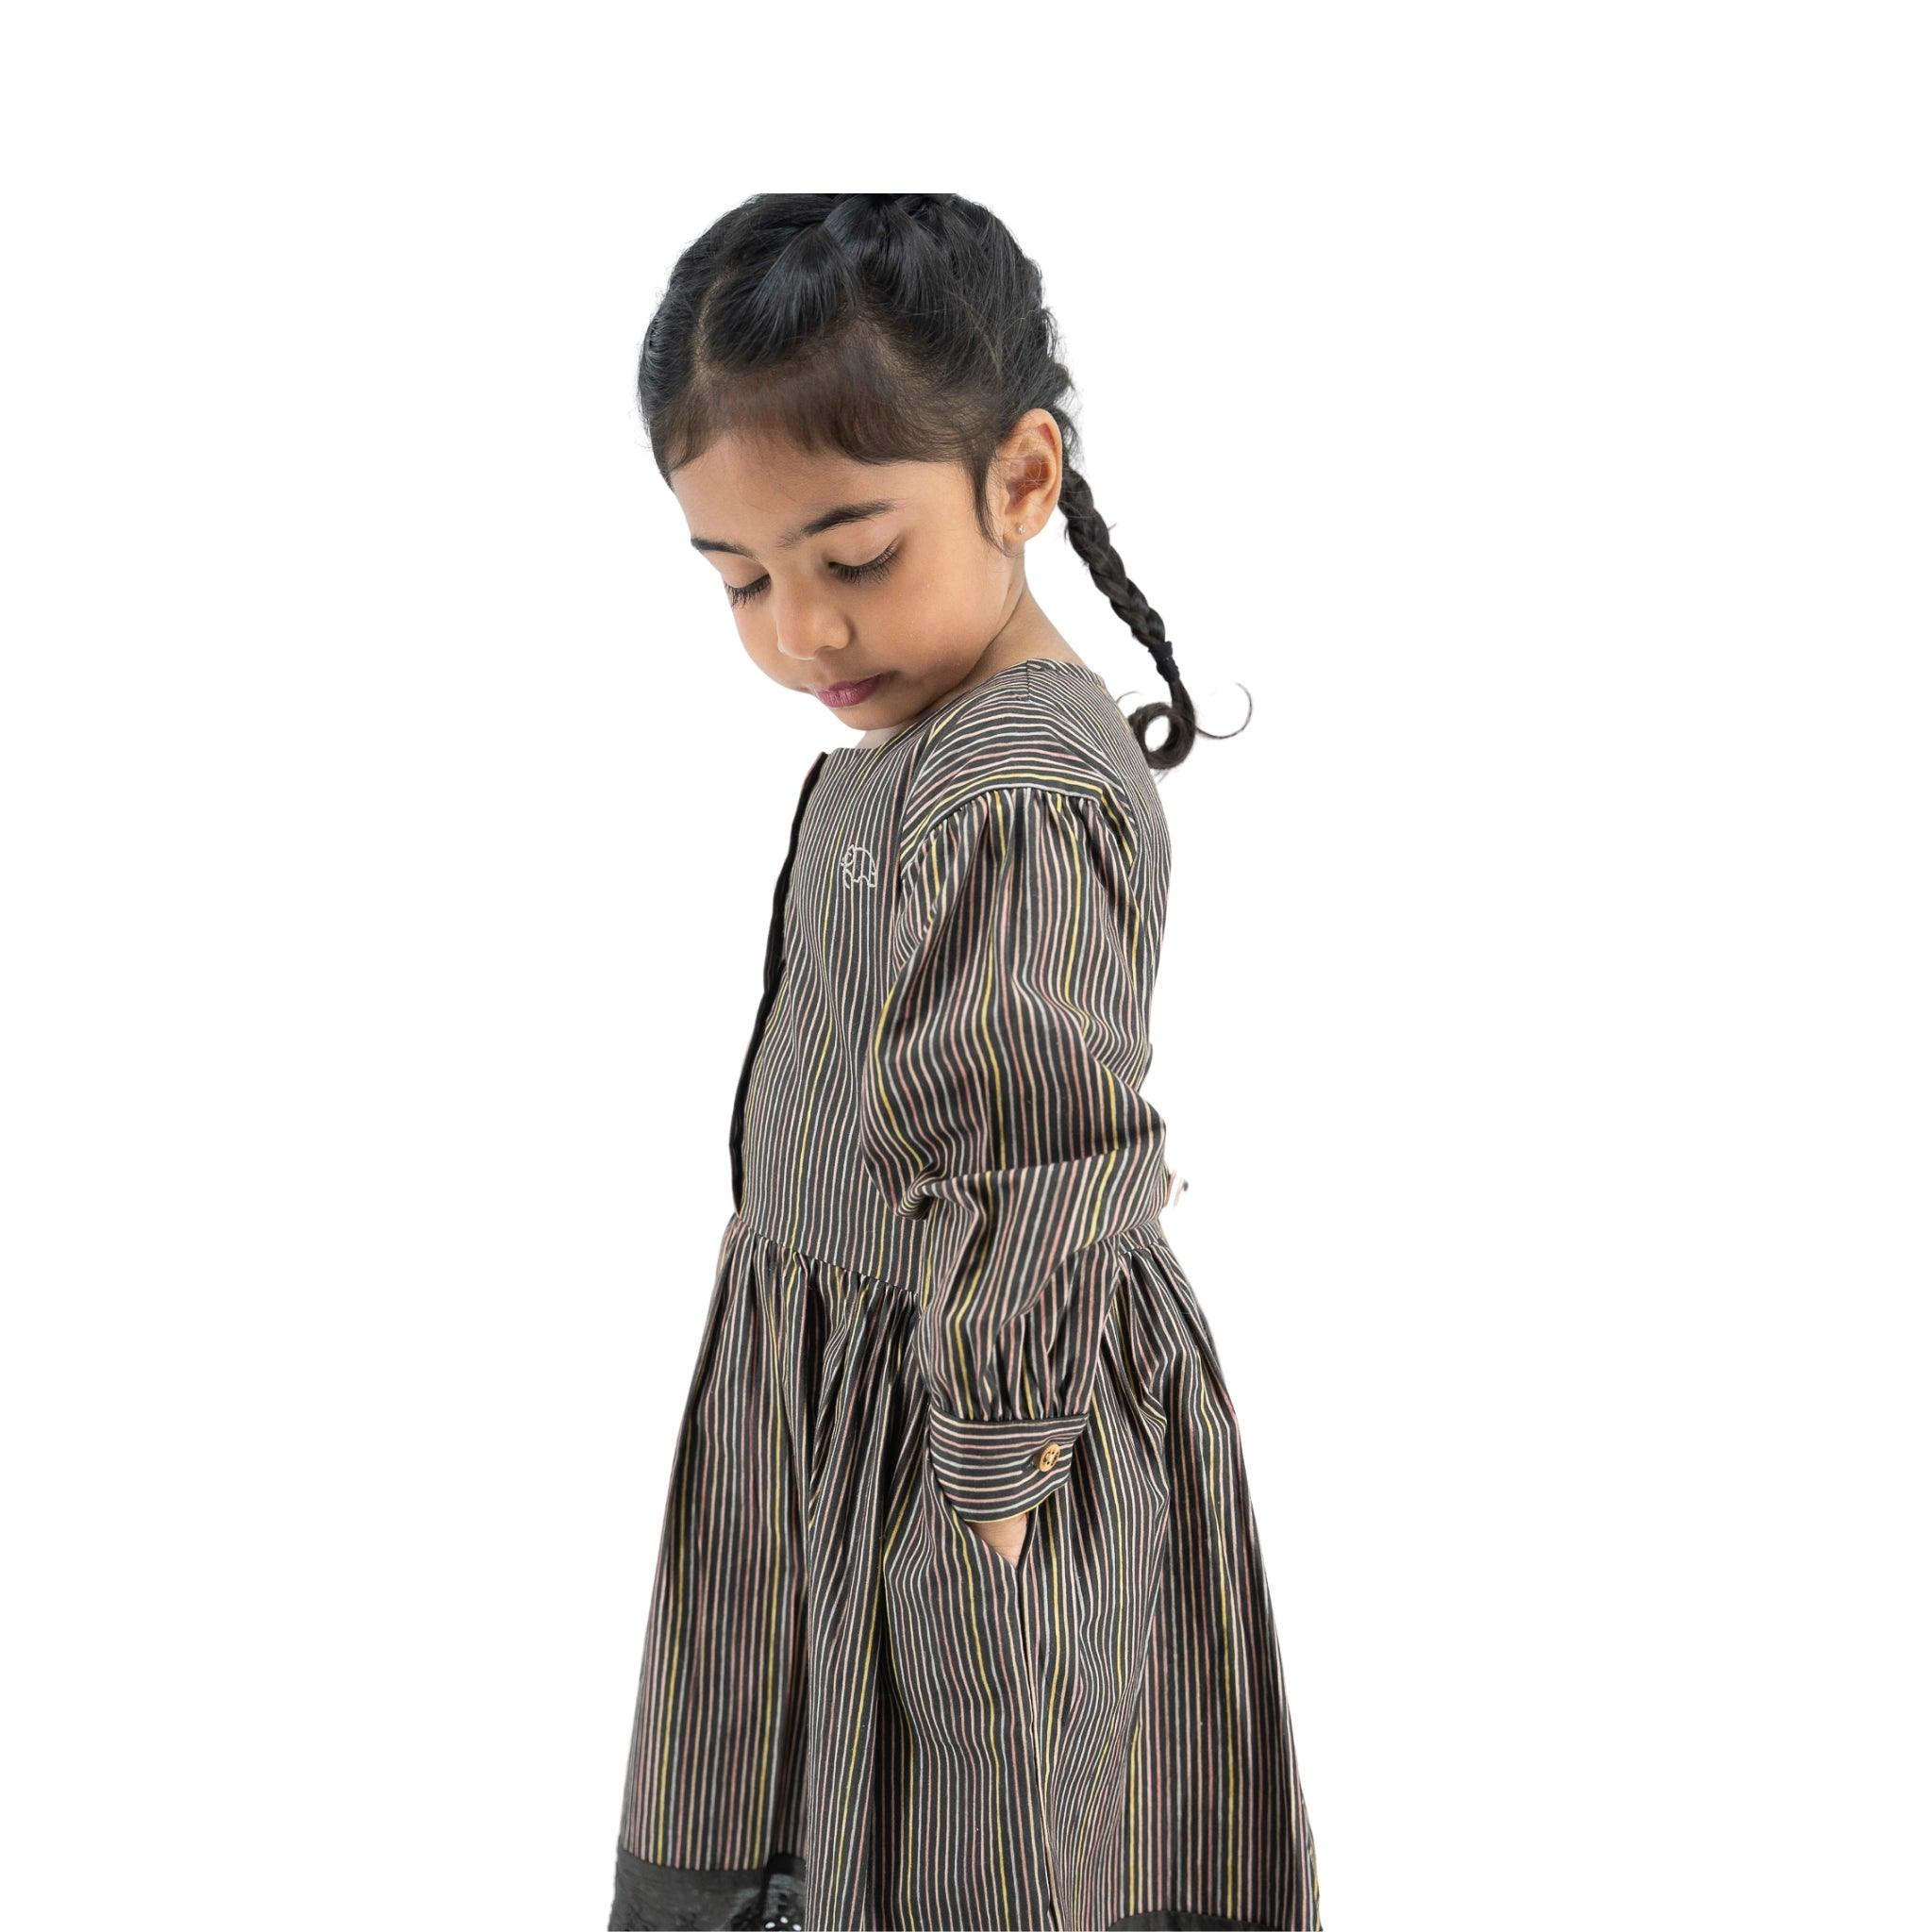 Young girl with braided hair, wearing a Karee black striped full sleeve cotton dress, standing sideways and looking down, isolated on a white background.